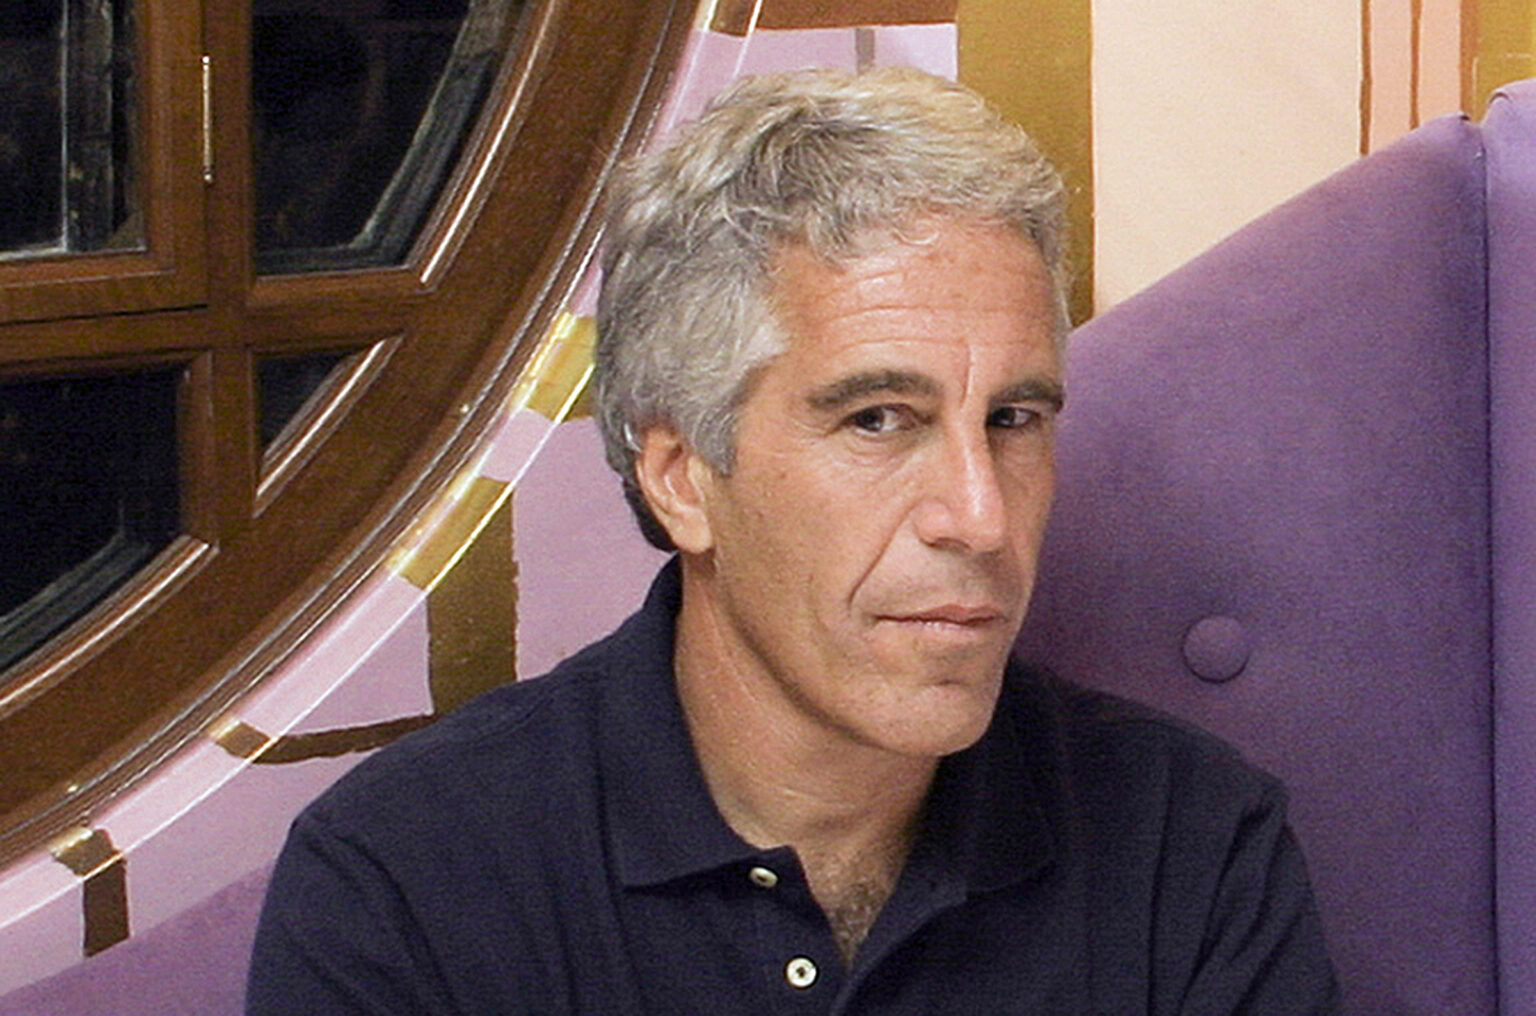 How did Jeffrey Epstein grab a cushioned deal? Here is everything we know about the details behind Jeffrey Epstein’s first sex offender trial in 2008.